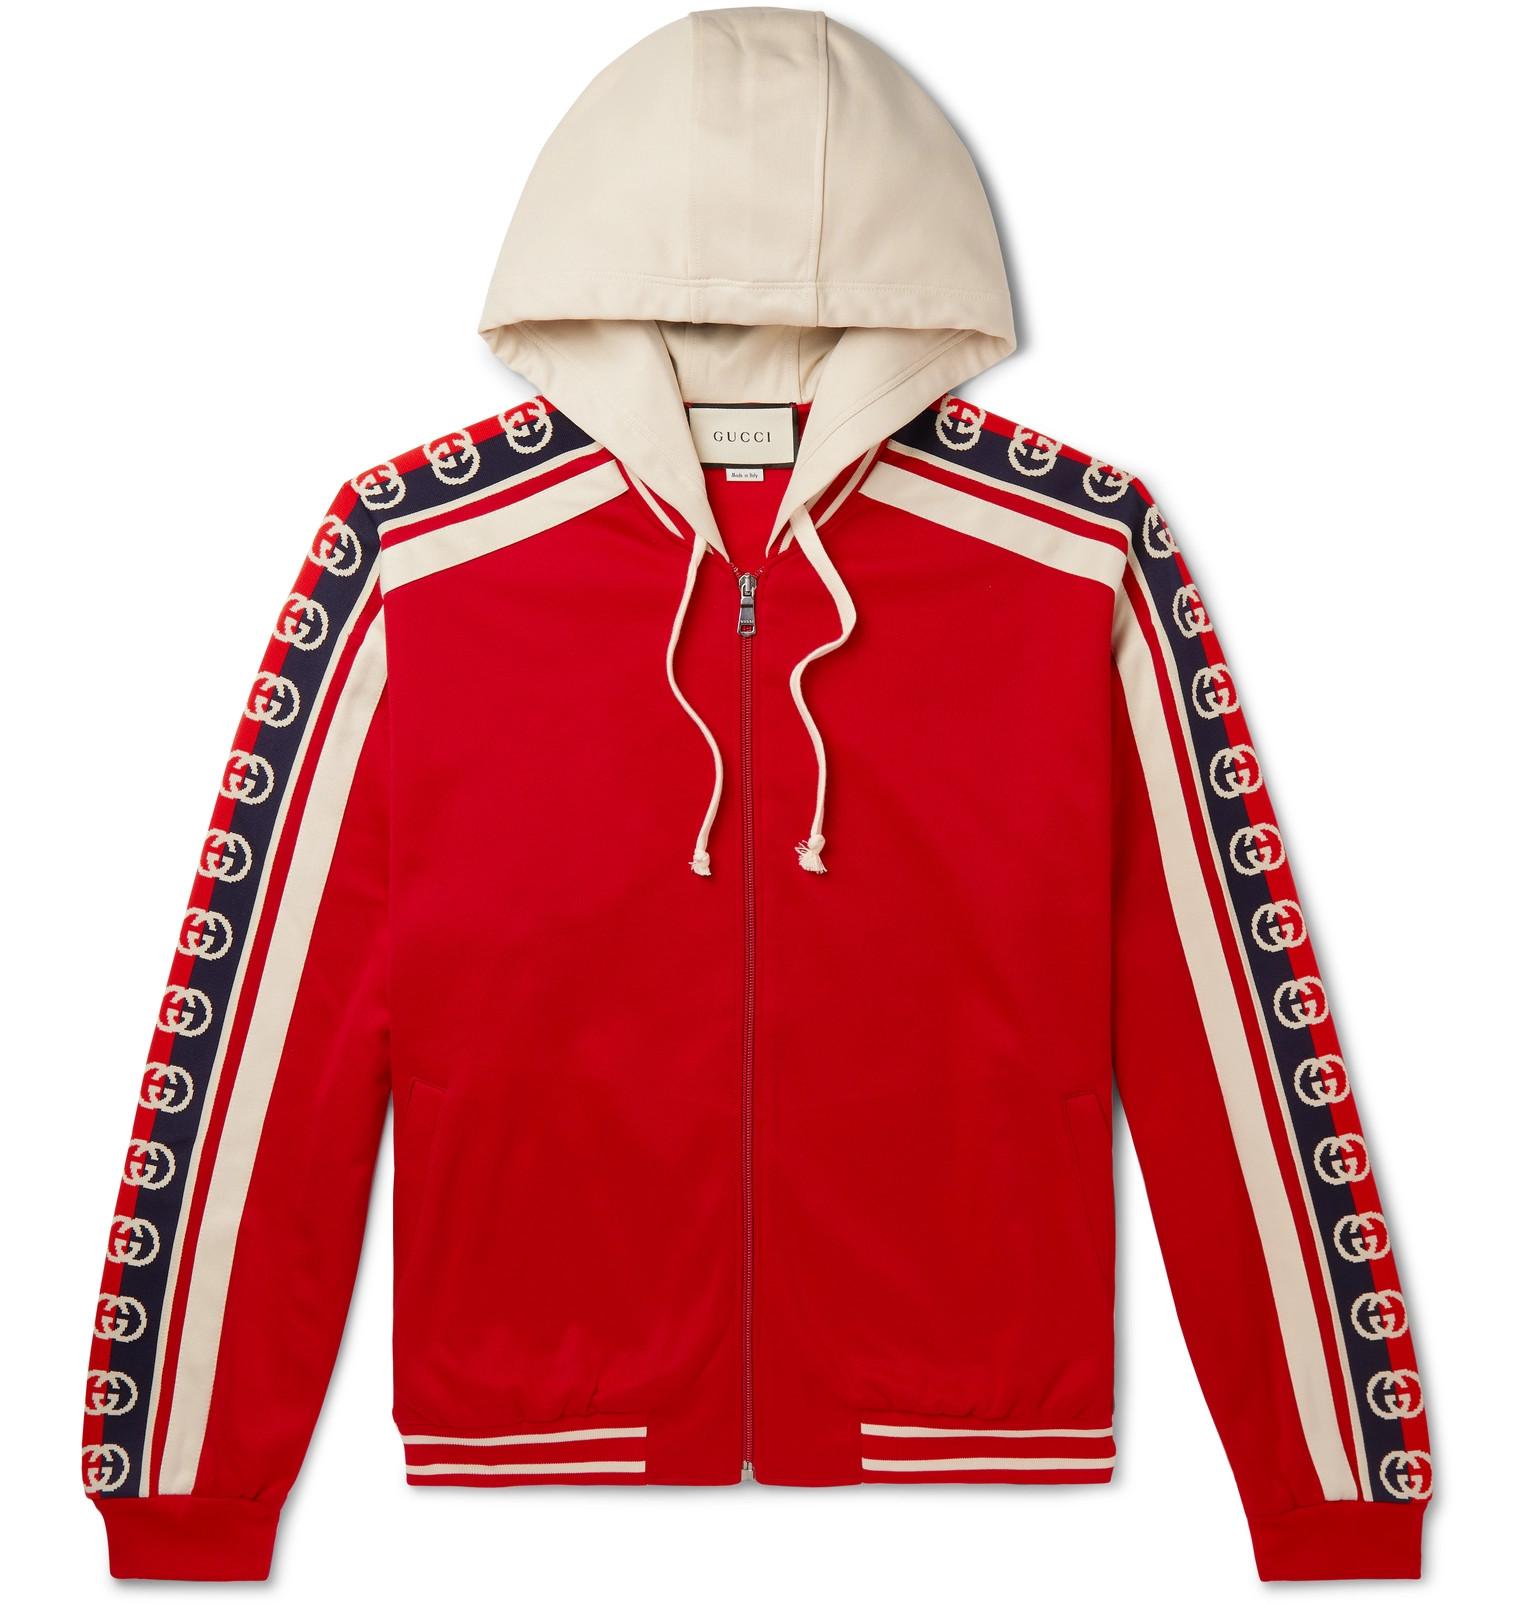 Gucci Webbing-trimmed Tech-jersey Zip-up Hoodie in Red for Men - Lyst